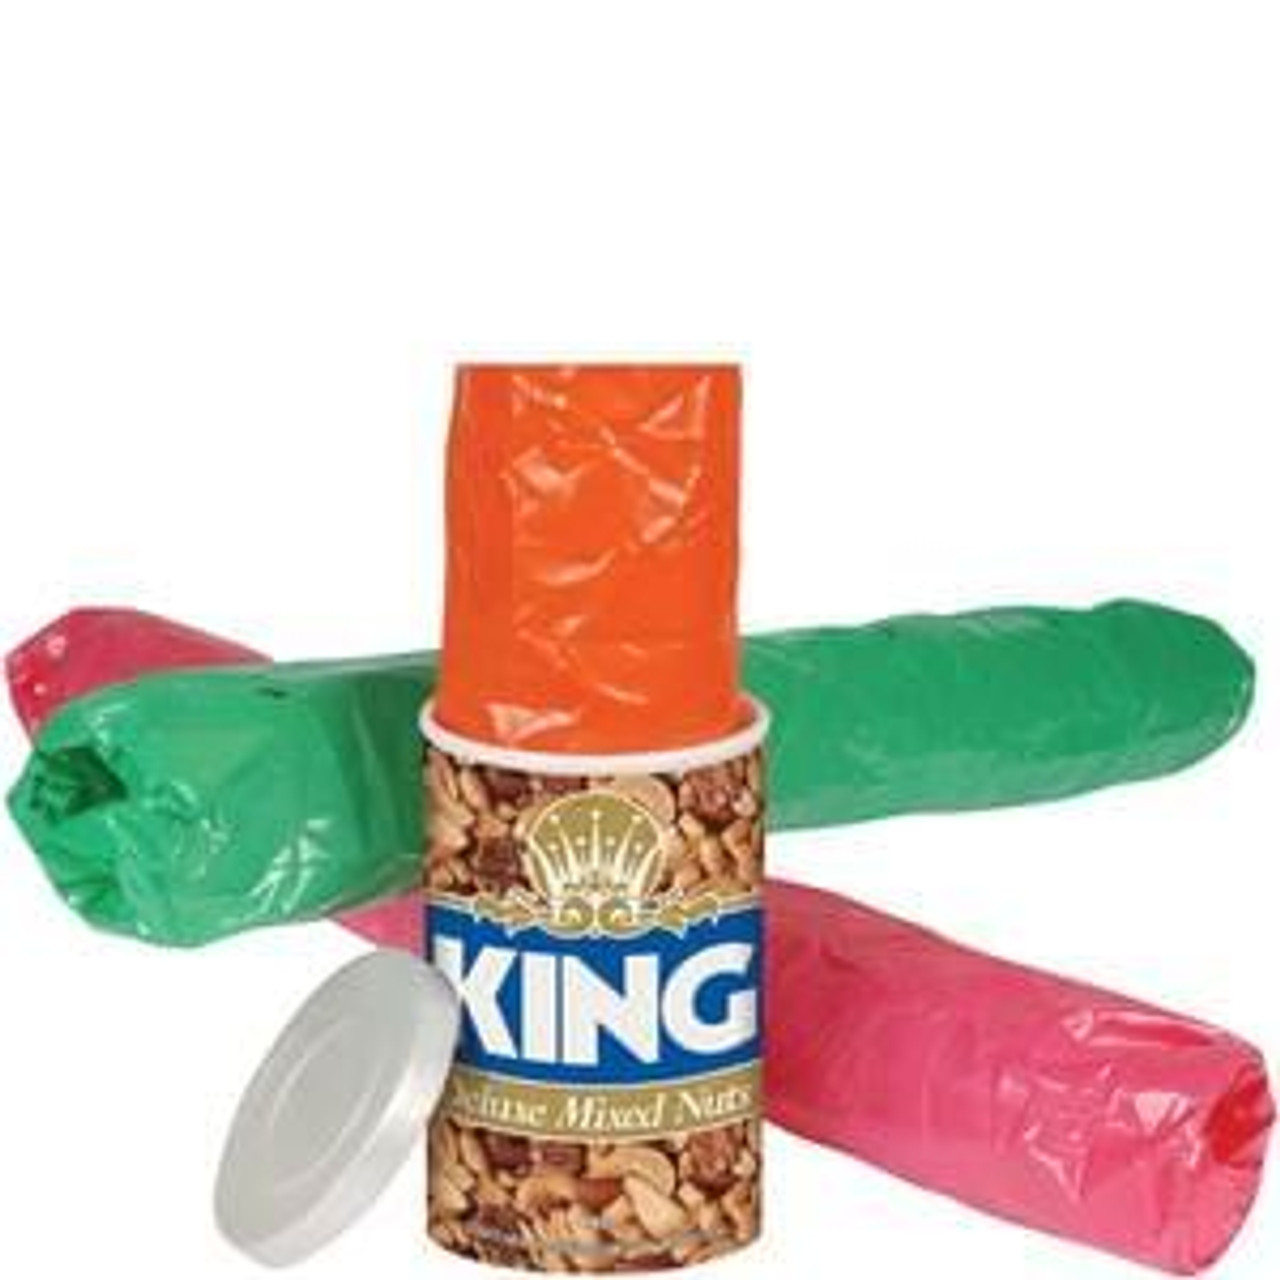 https://cdn11.bigcommerce.com/s-hc192472/images/stencil/1280x1280/products/2111/6785/King_Nut_Can_Deluxe_Magic_Trick_Funny_Spring_Snake_4__73562.1675426831.jpg?c=2